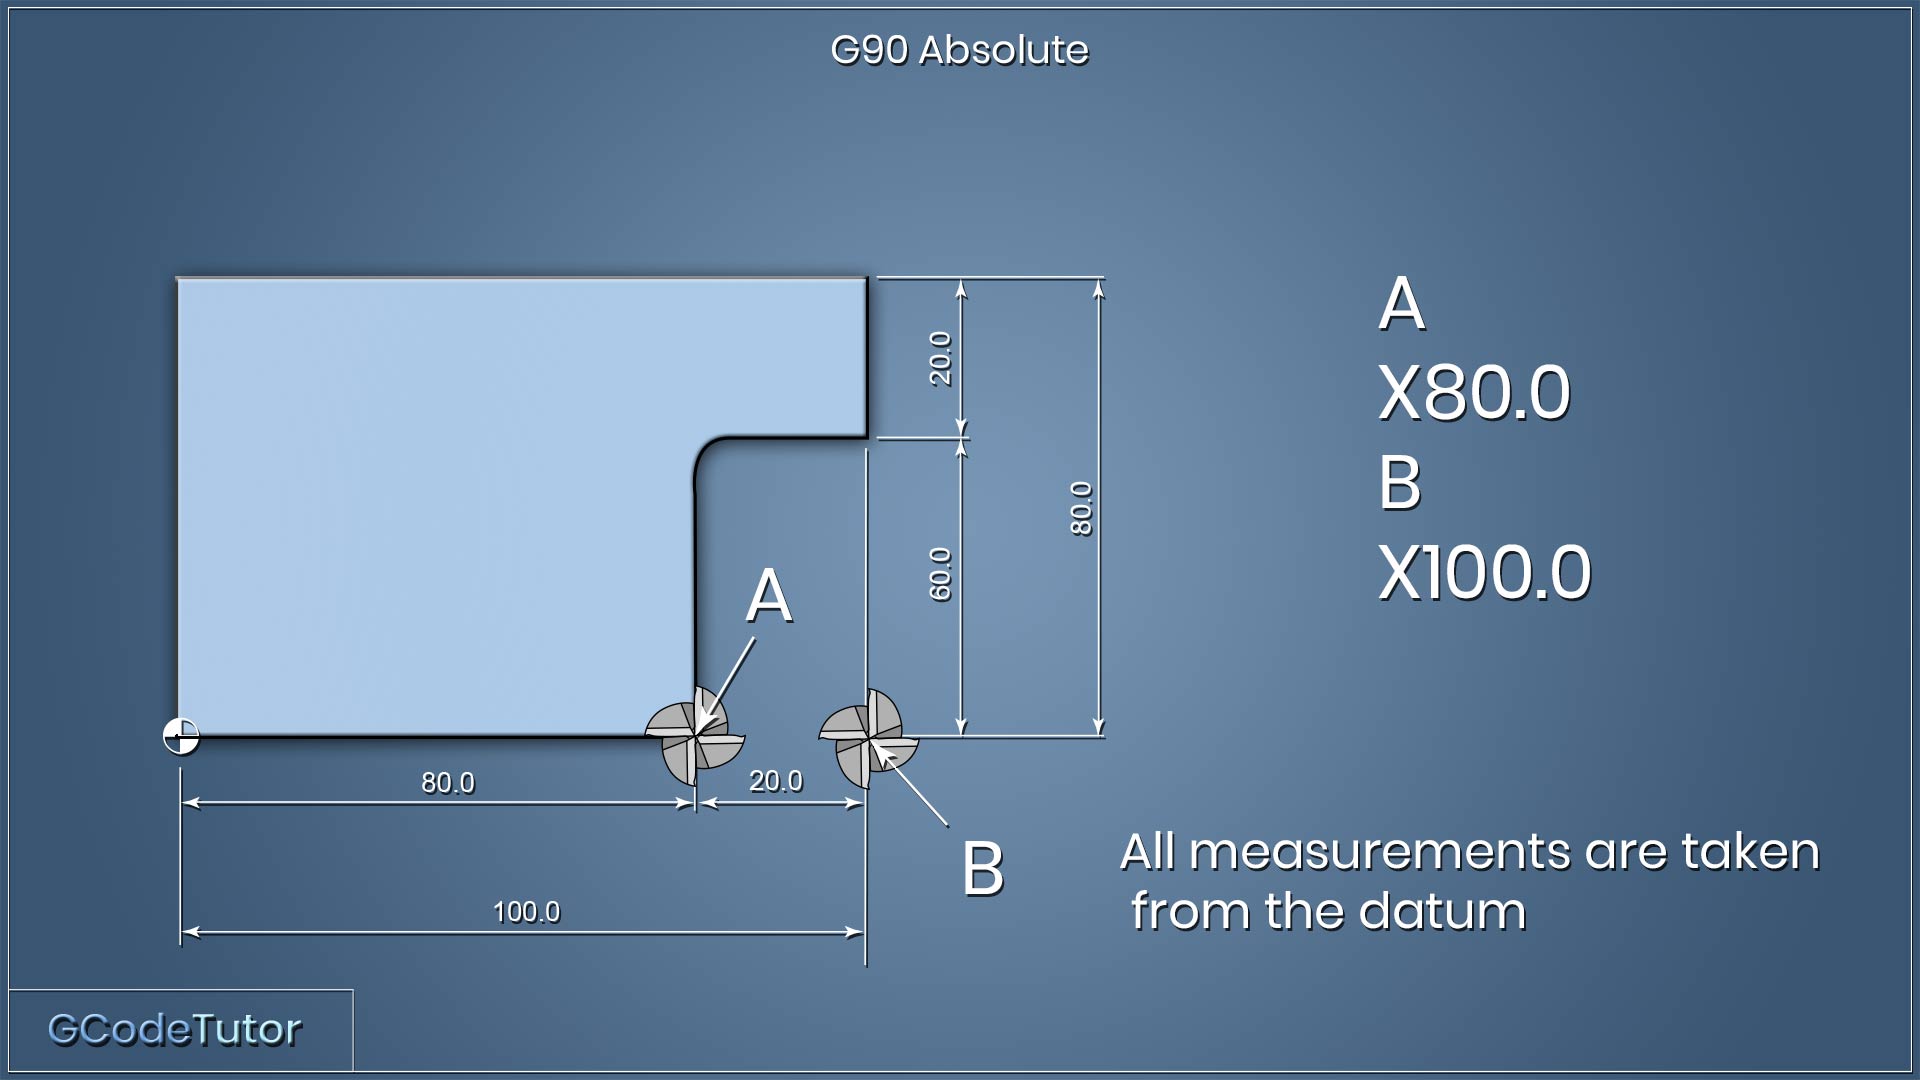 G90 absolute coordinate system for a CNC machine